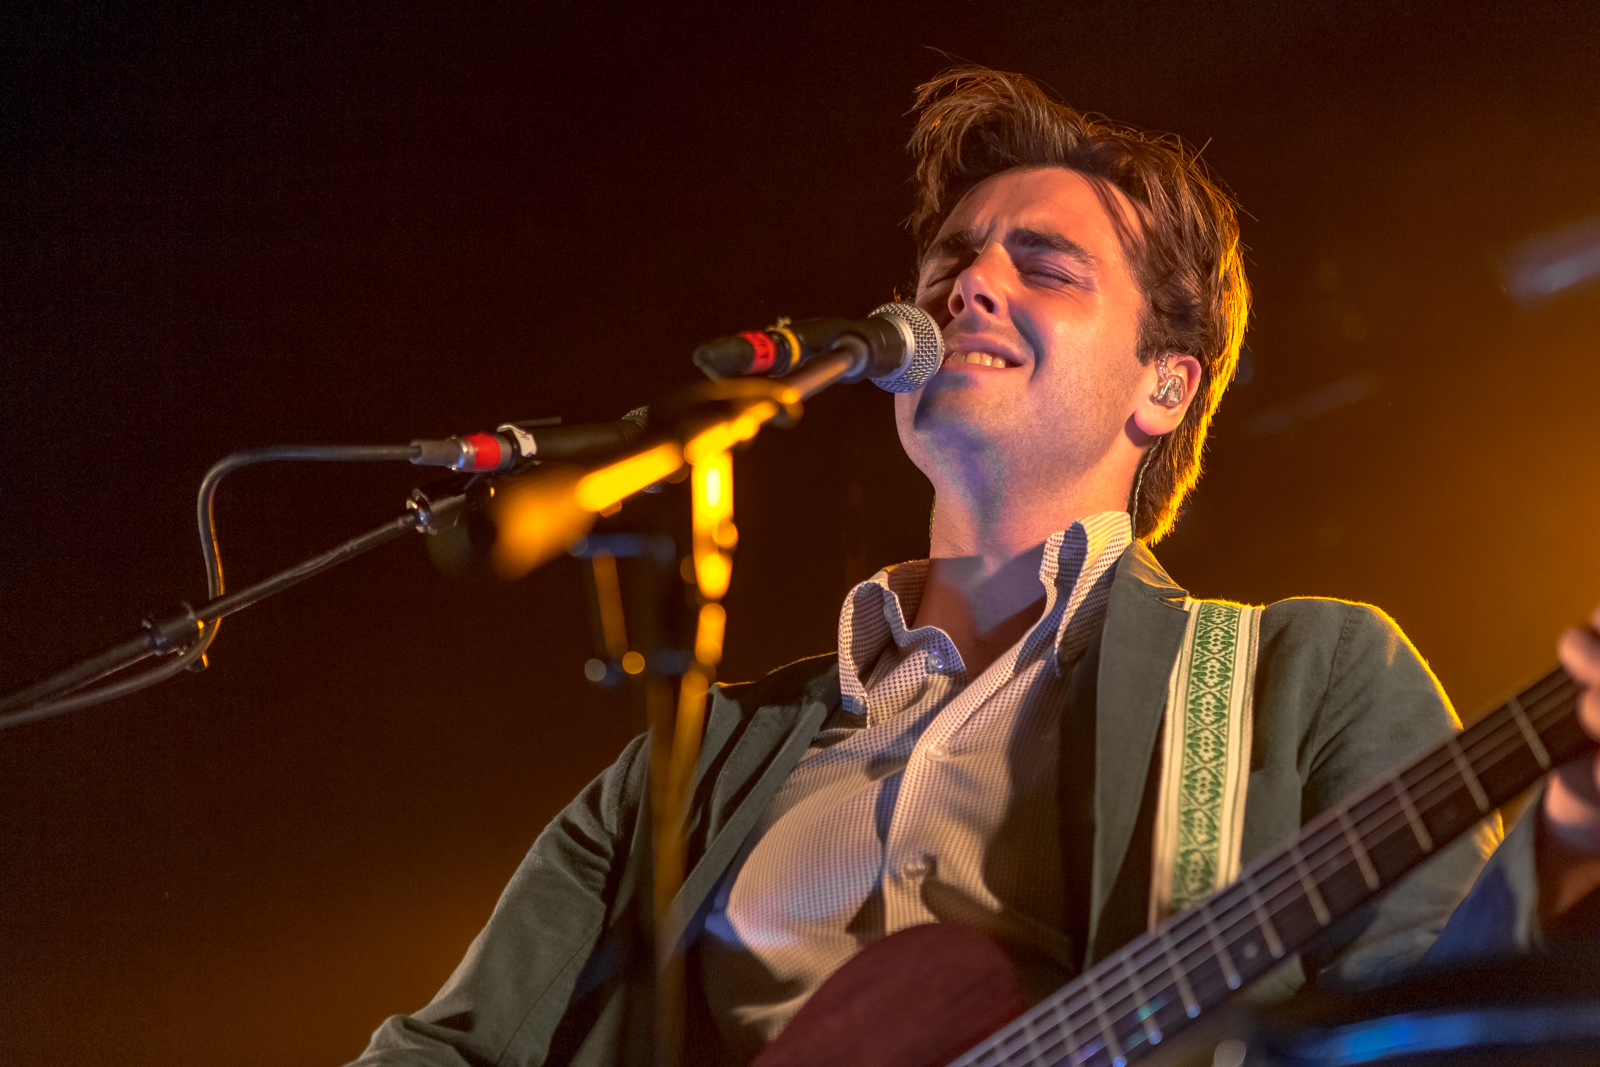 Lord Huron at Emo’s with Superhumanoids Live Review & Photos Pop